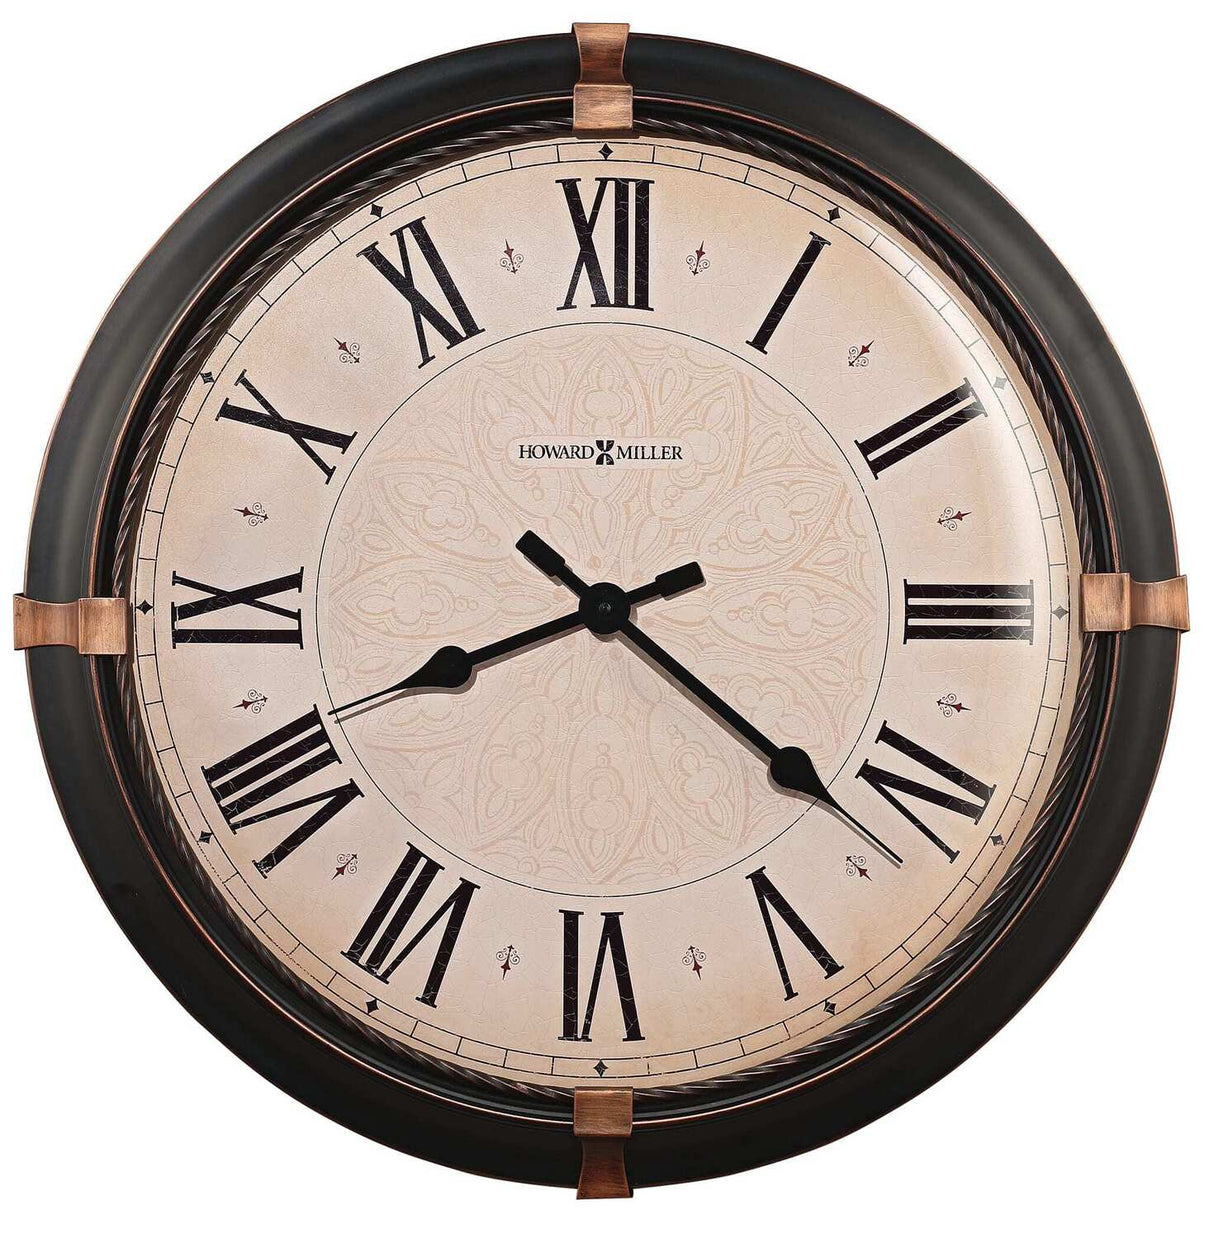 Howard Miller Atwater Wall Clock 625-498 - Vintage Metal Clock with Dark Rubbed Bronze Finish, Aged Bronze Accents at (3,6,9,12 Positions), Quartz Movement